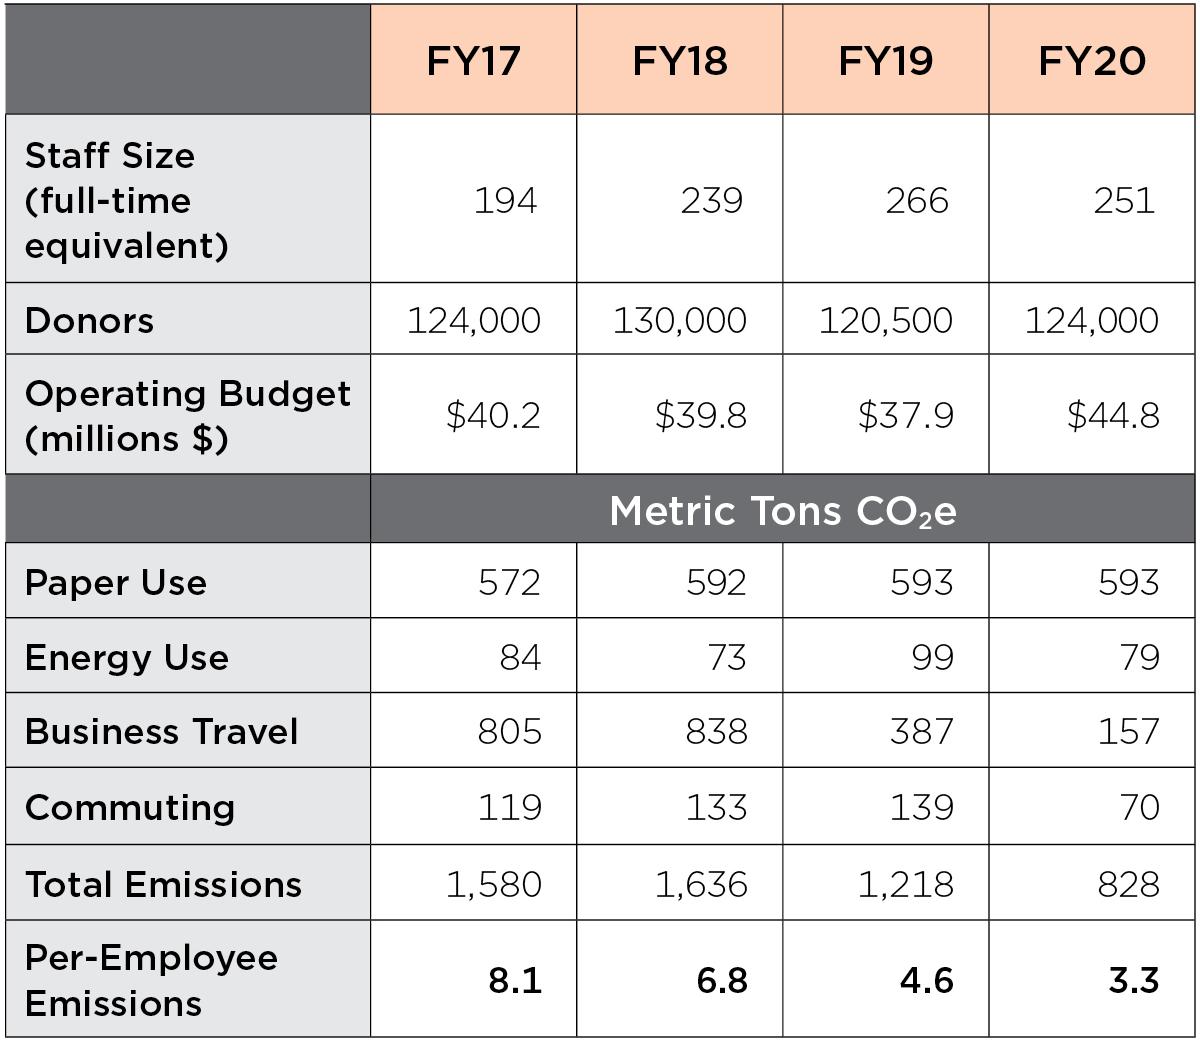 A breakdown of paper use, energy use, business travel, commuting, and total emissions from FY17 to FY120.